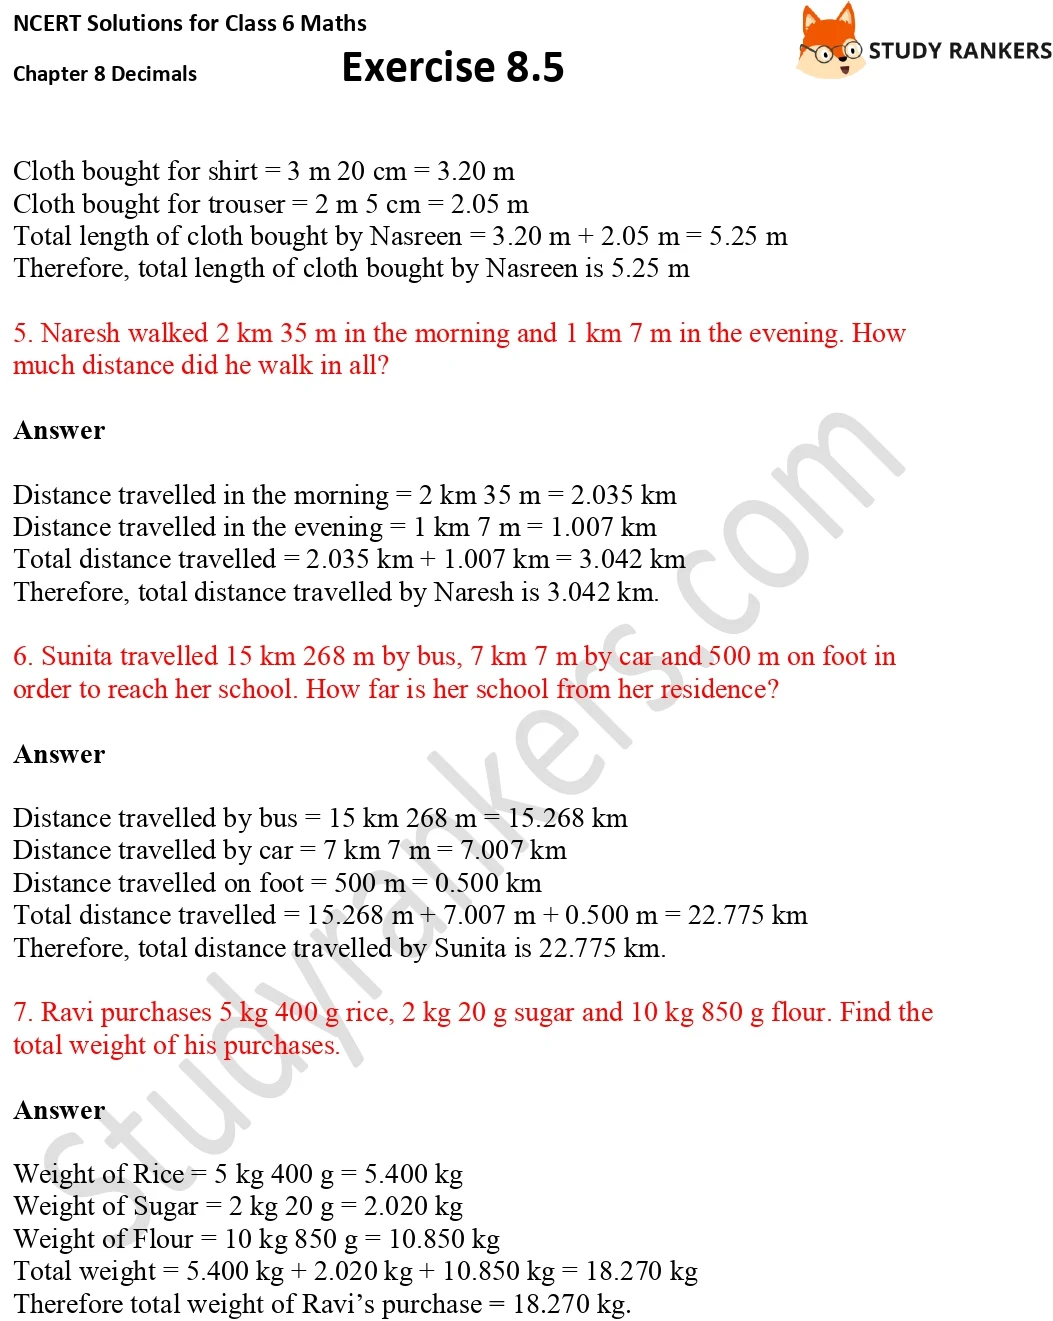 NCERT Solutions for Class 6 Maths Chapter 8 Decimals Exercise 8.5 Part 2